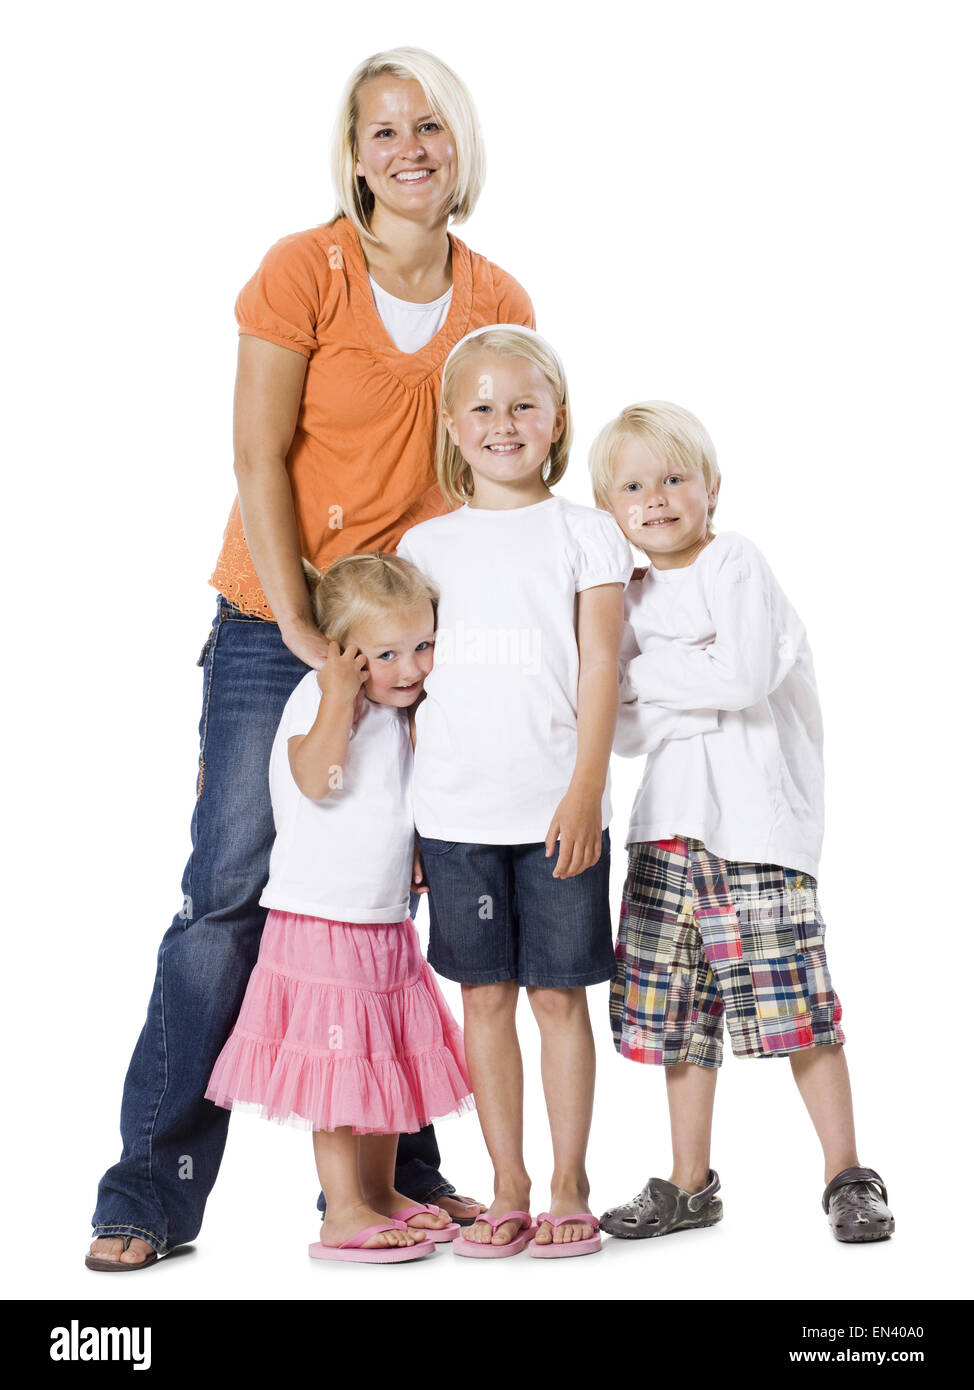 mother with three children Stock Photo